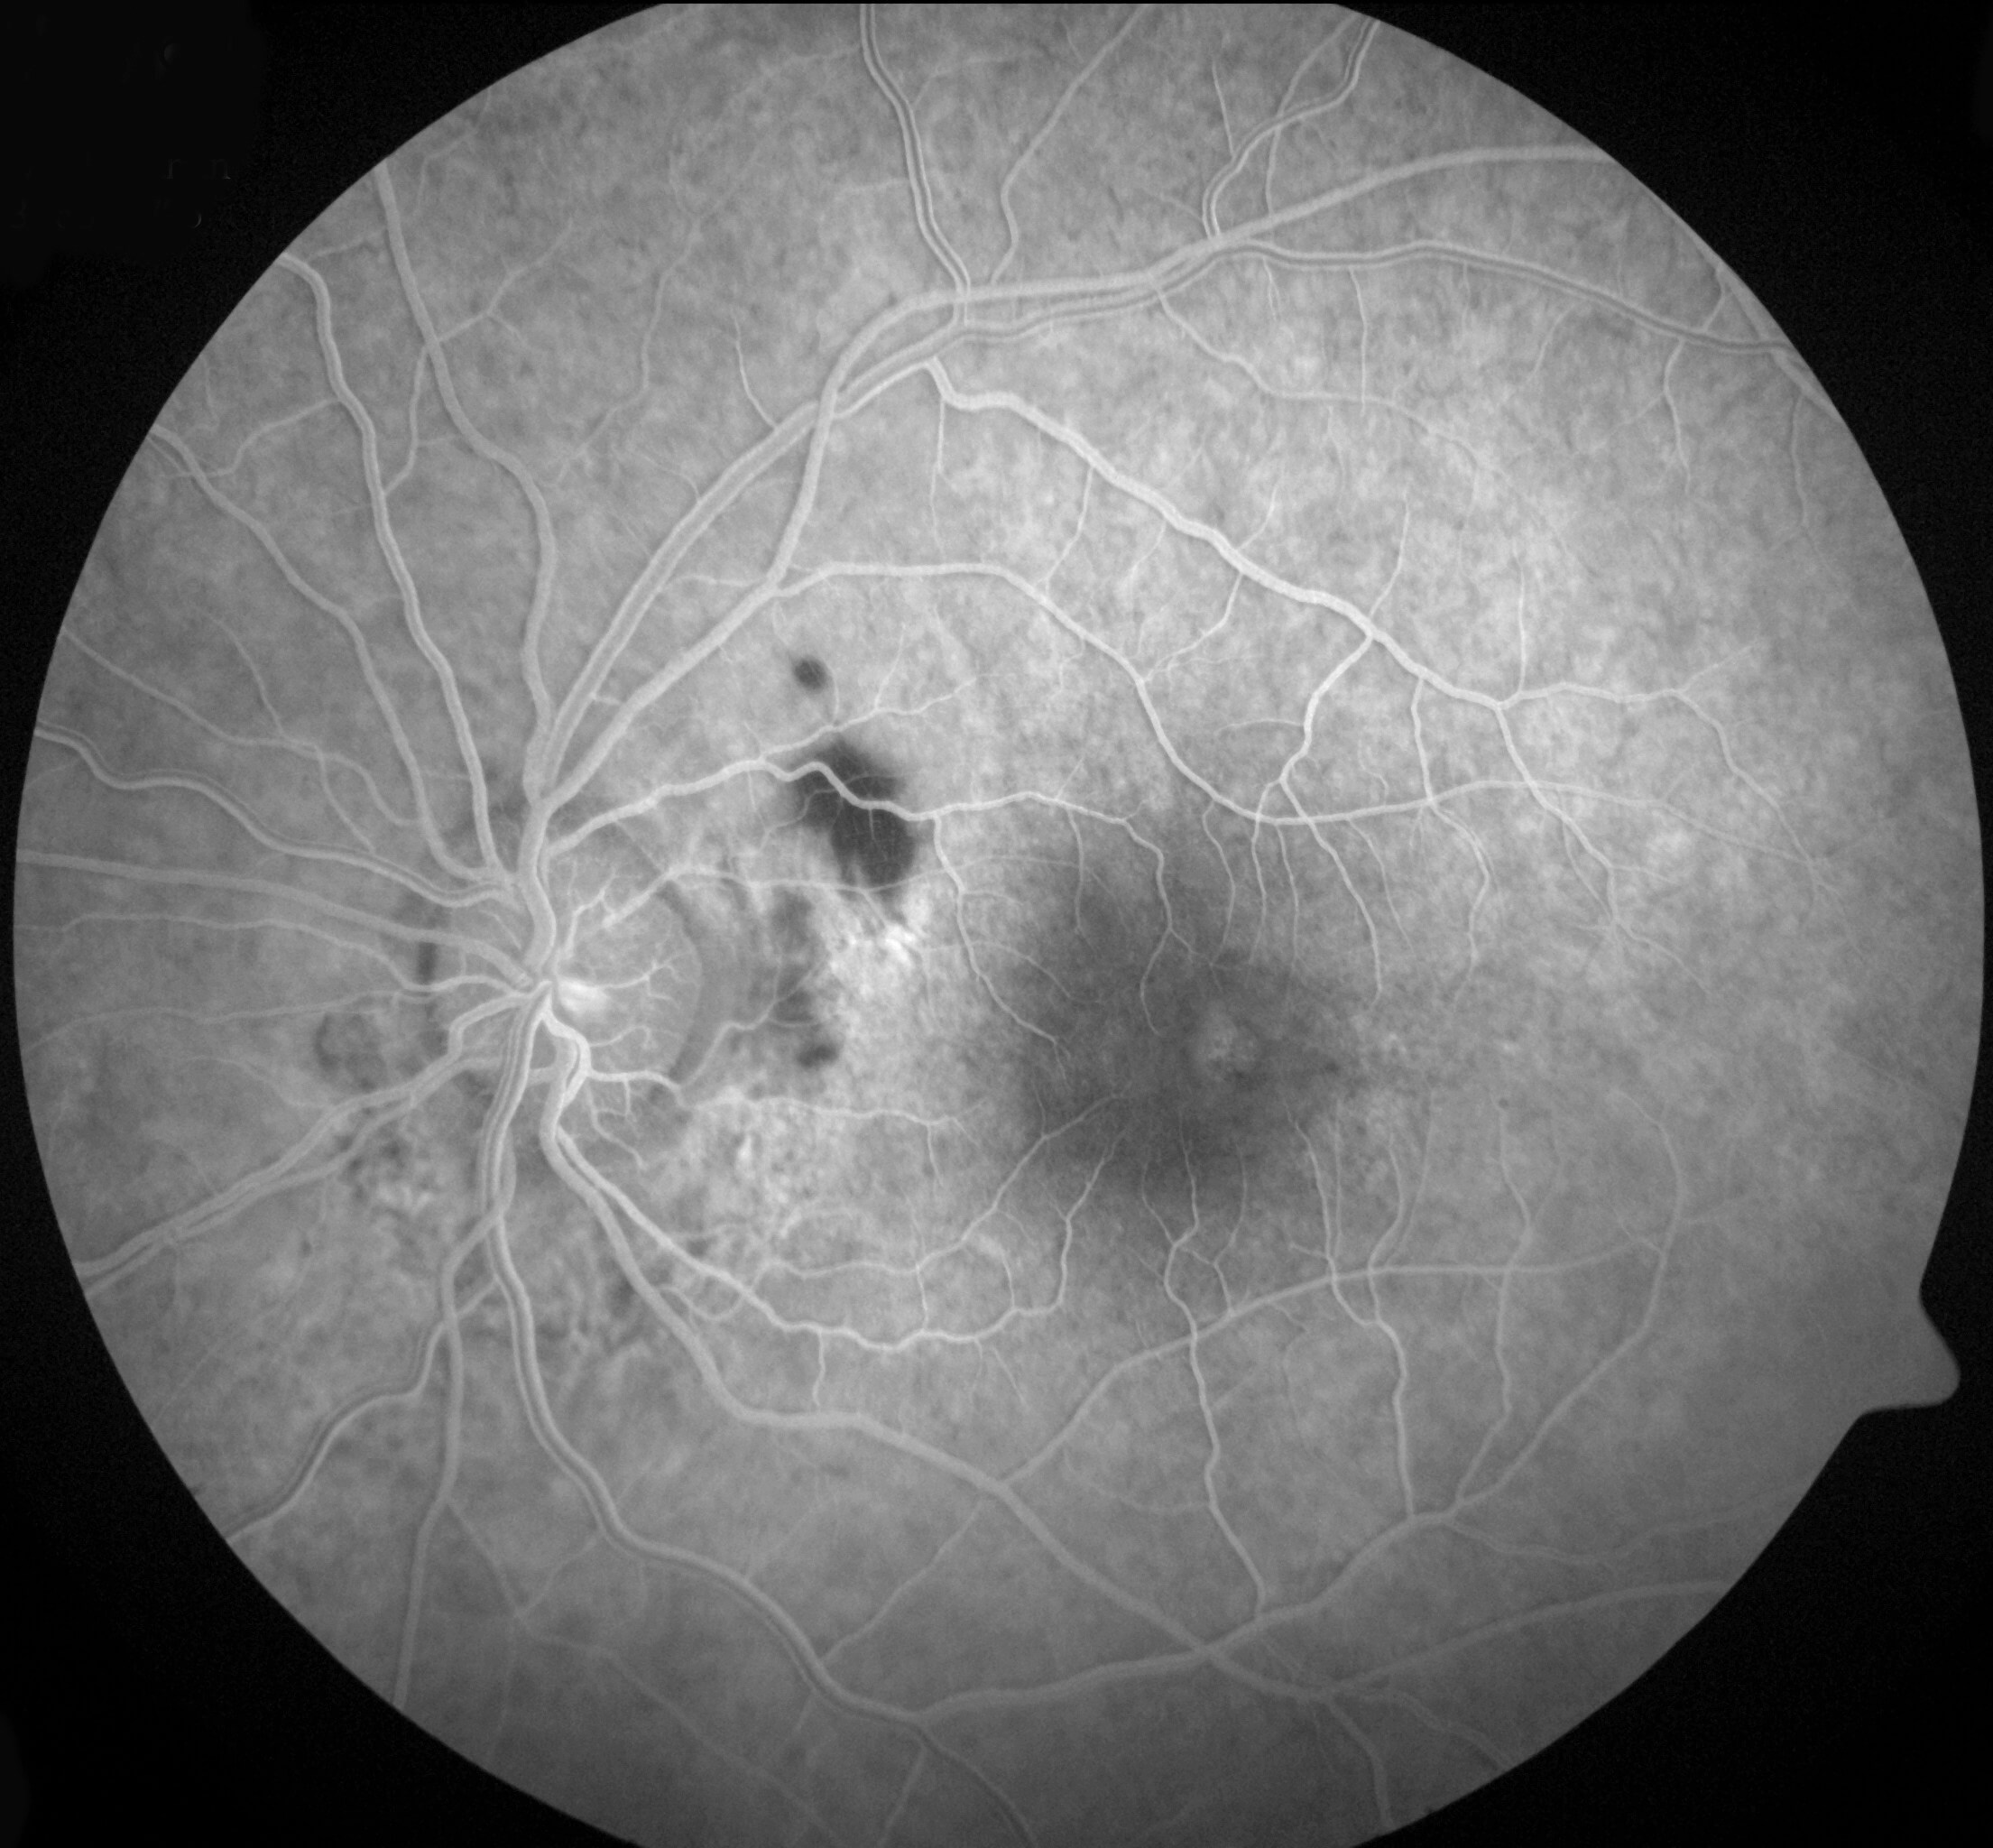 Fluorescein angiography demonstrated a small area of mild hyperfluorescence in the temporal perifoveal area that did not increase in intensity or size over time. Peripapillary areas of hypofluorescence correlate to deep retinal haemorrhages with no evidence of choroidal rupture.